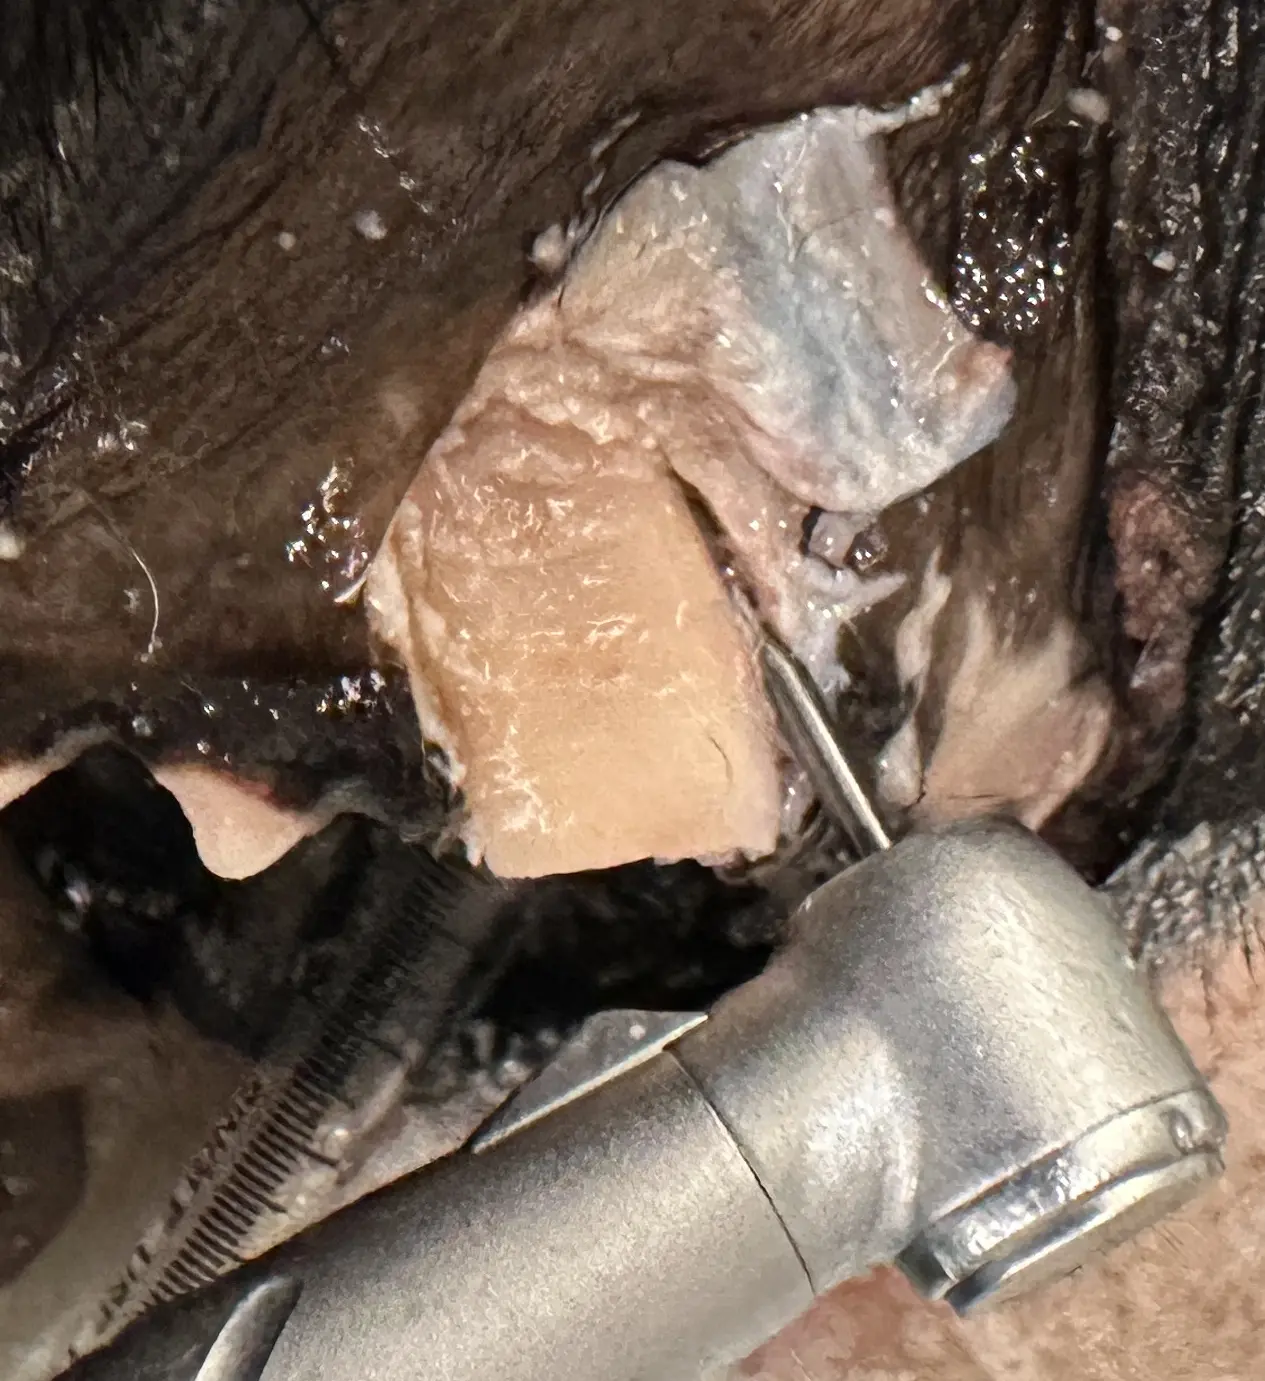 figure 4b: Crown amputation allows easy access to remove buccal bone overlying maxillary canine tooth in a cadaver specimen